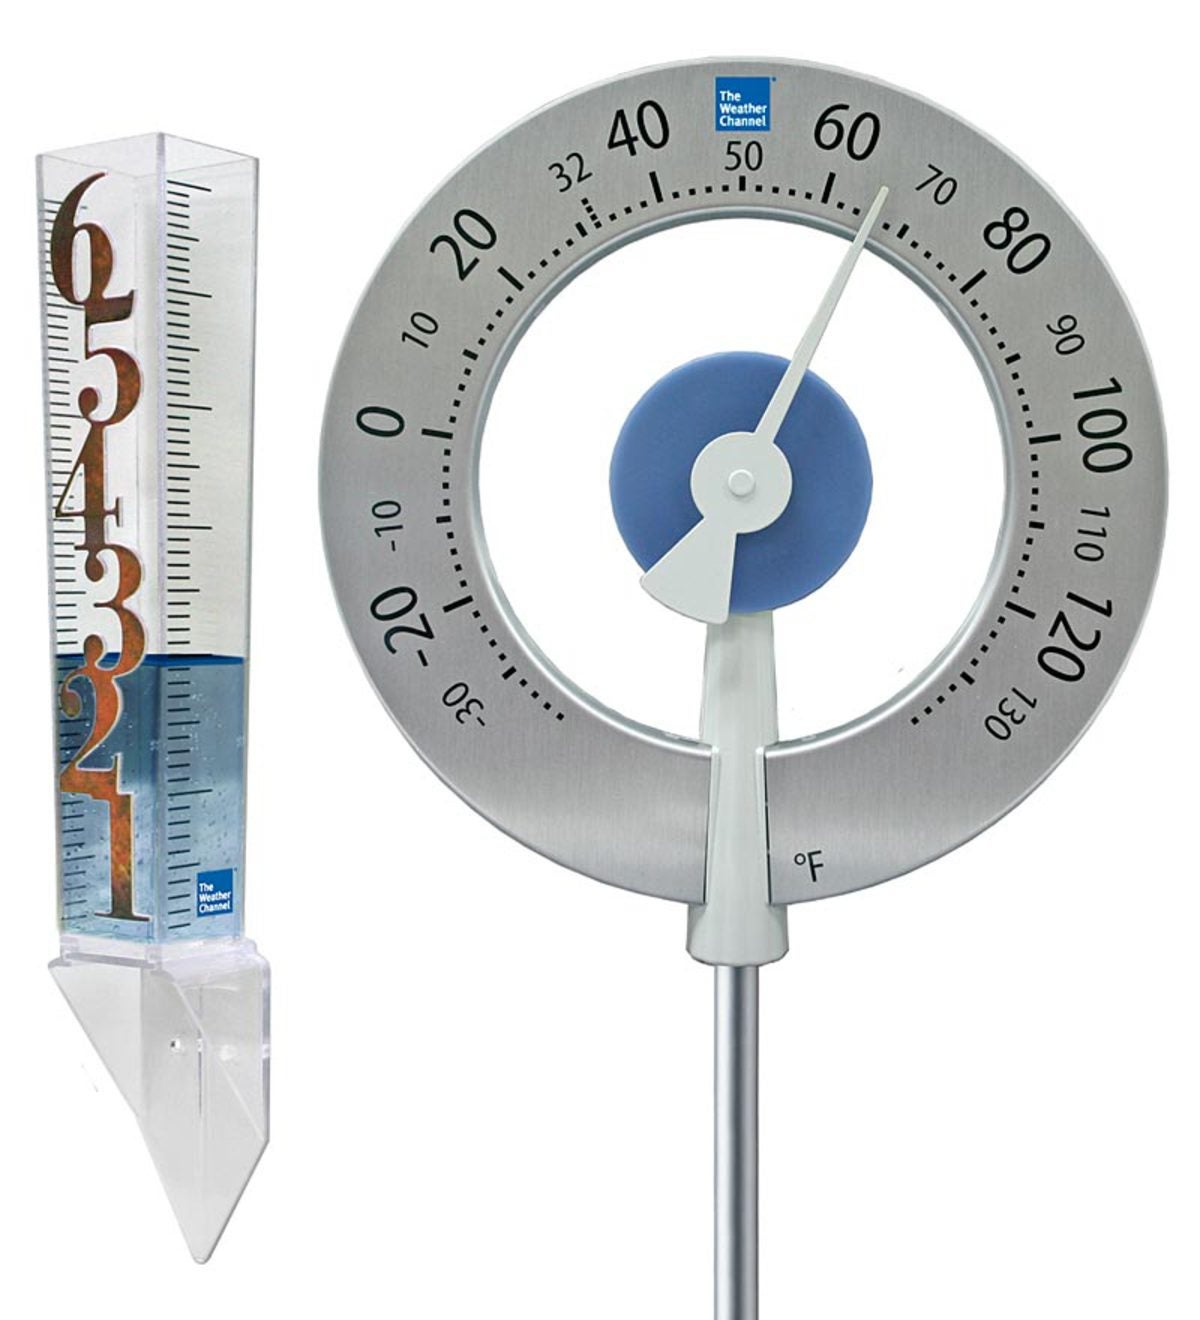 La Crosse 12" inch Sabal Palmetto Tree Dial Thermometer with Free Rain Gauge 